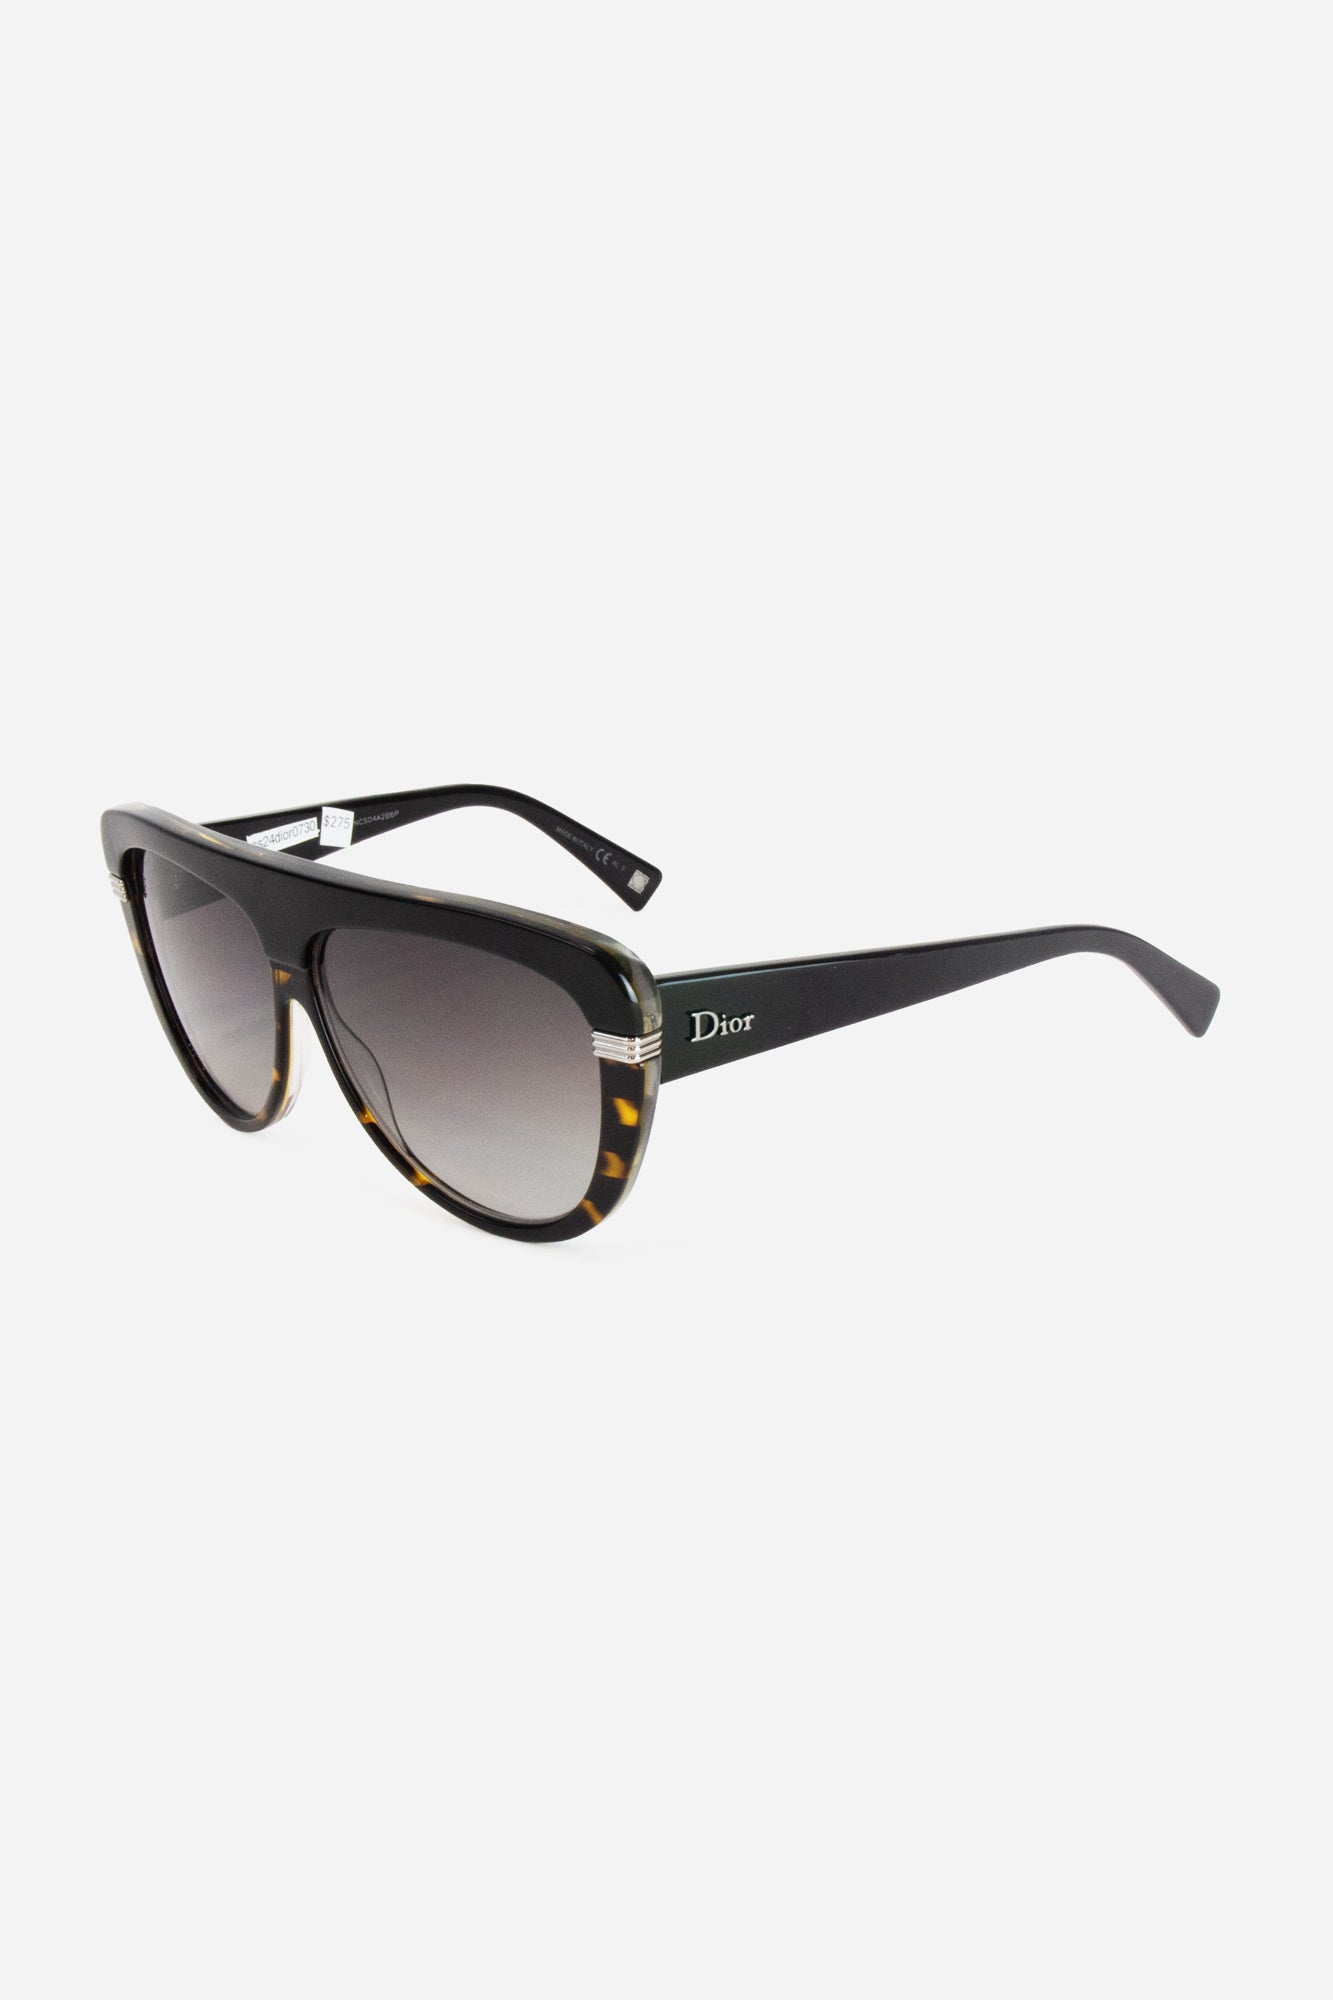 Thick Square Frame Sunglasses Dior Label On Side